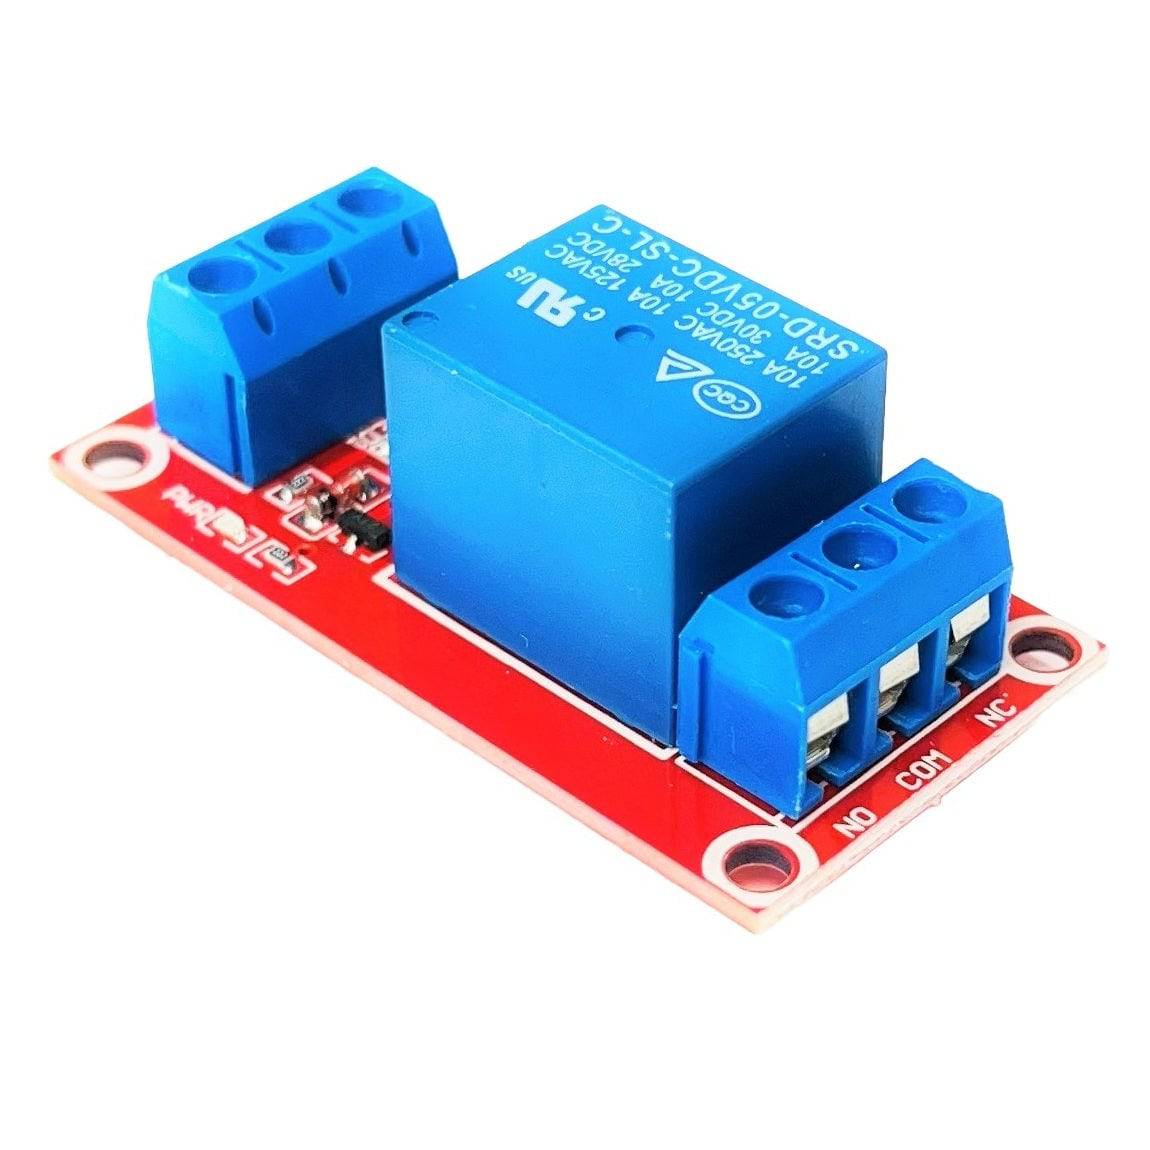 5V 1 Channel Relay Module High and Low Level Trigger with Optocoupler - RS5545 - REES52